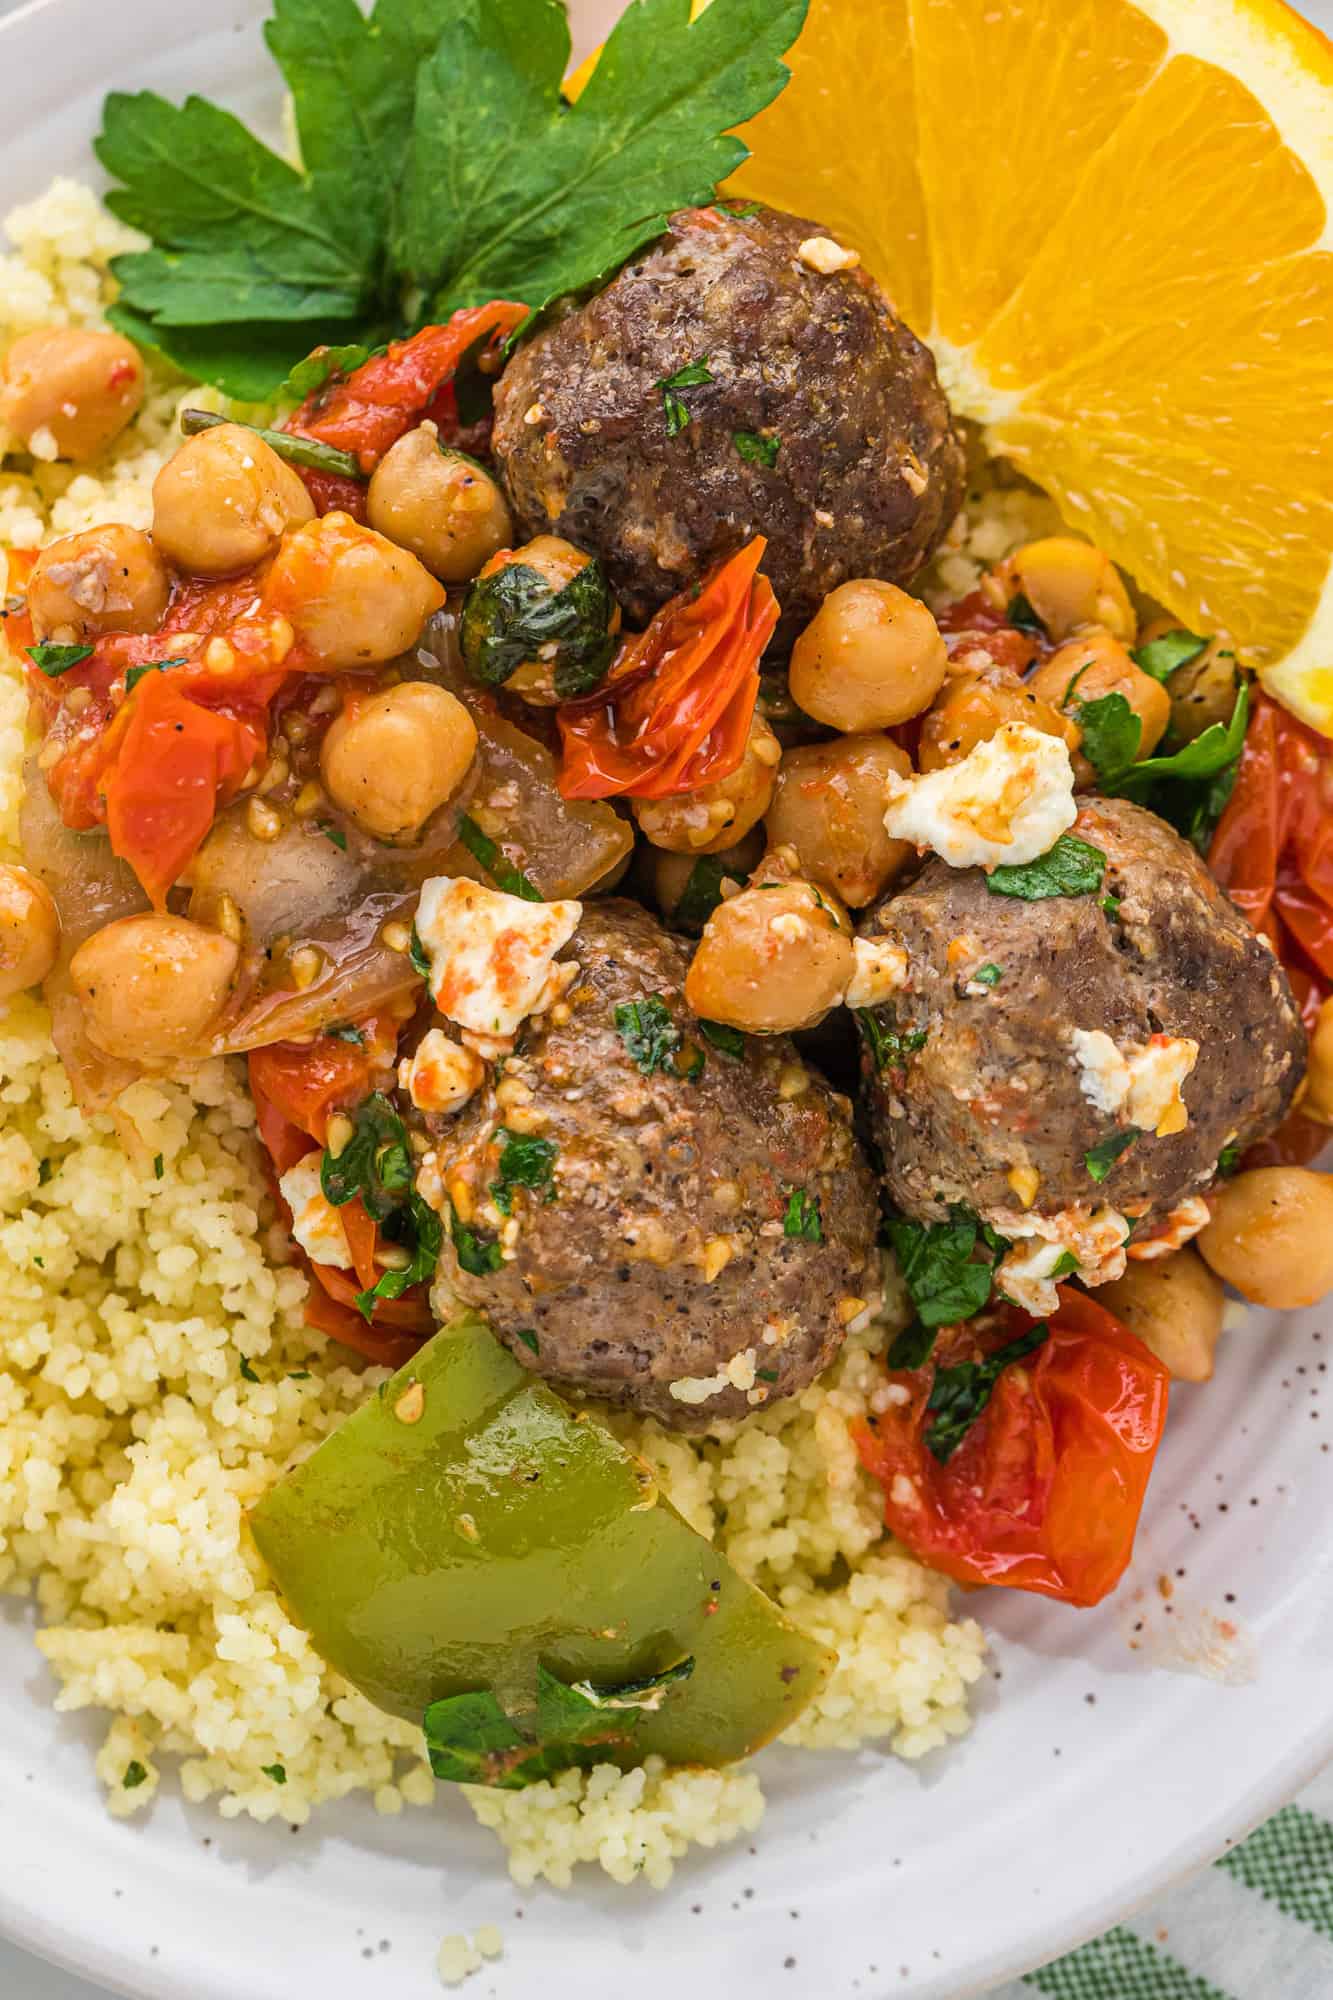 Close up view of moroccan meatballs on couscous.